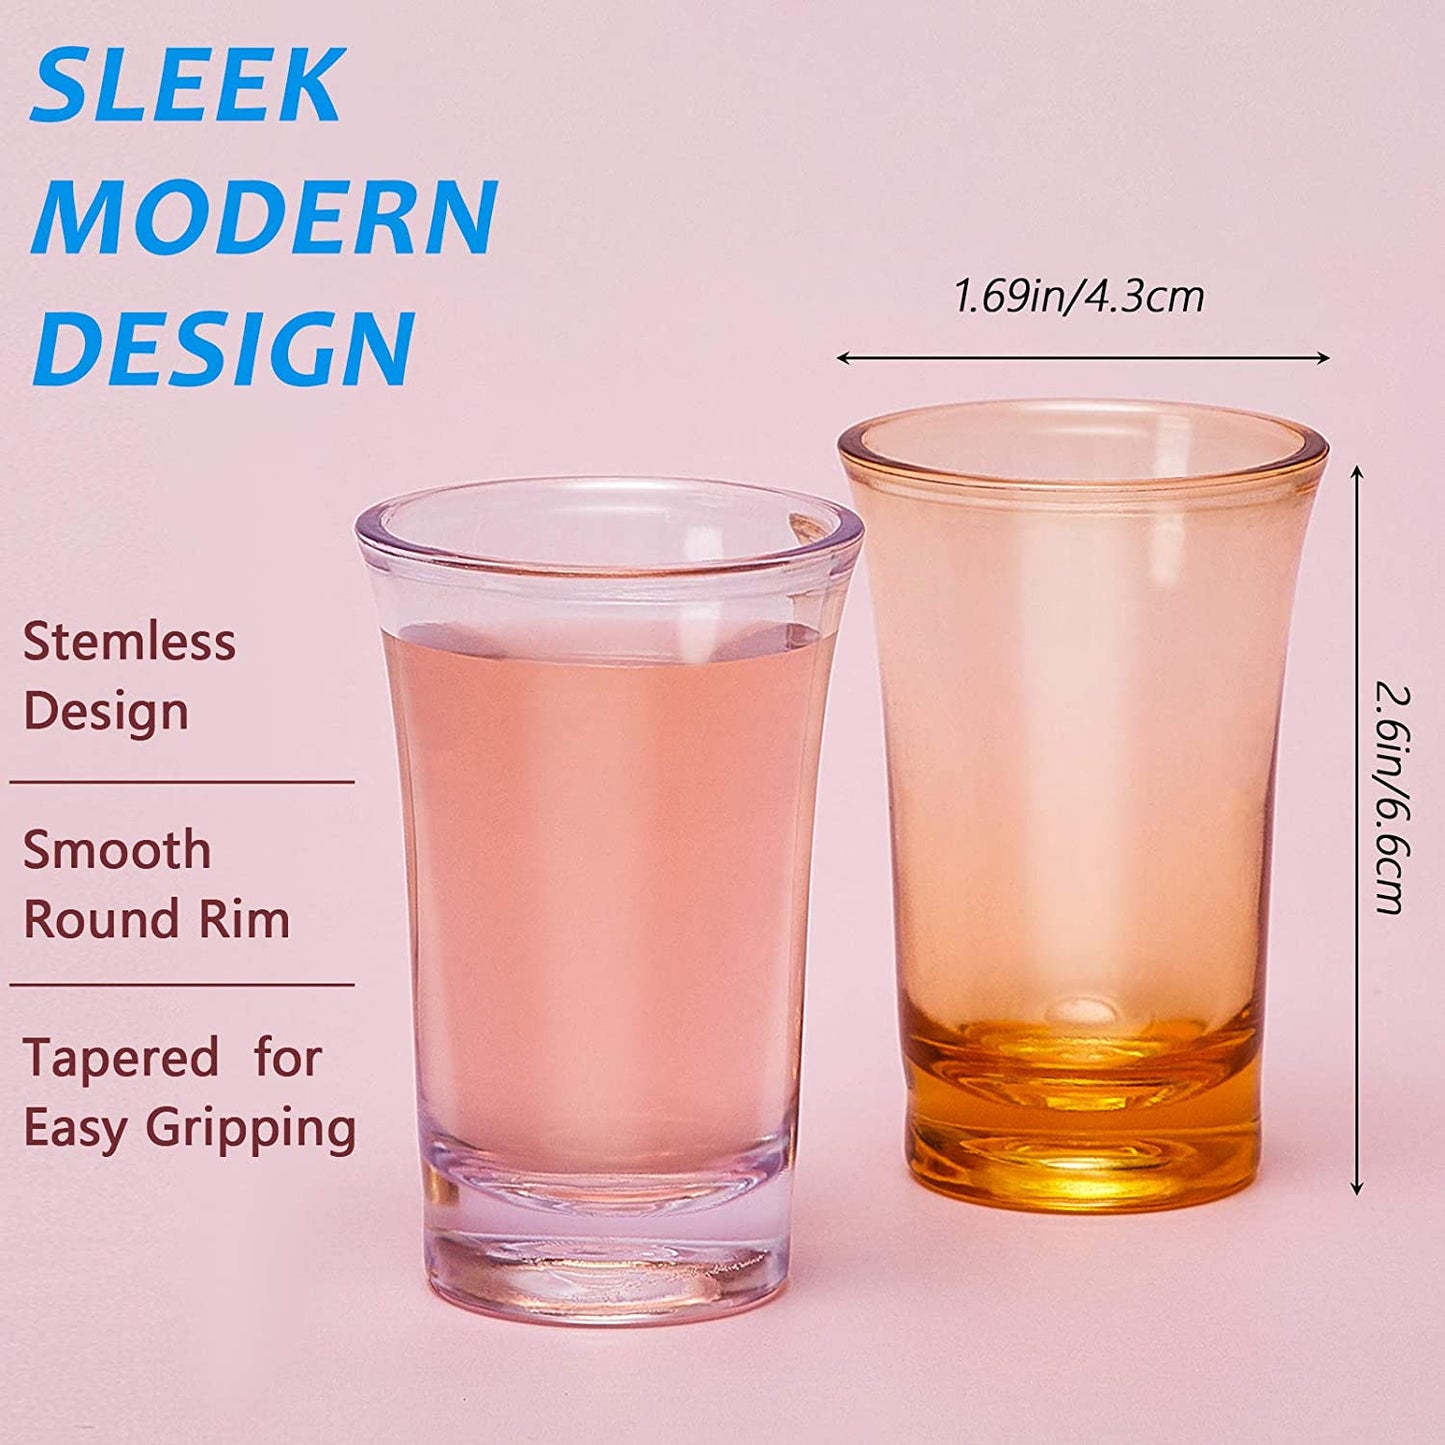 12 Pieces Shots Acrylic Cups Colorful Shot Glasses 1.2-Ounce Heavy Base Shot Glasses for Spirits and Liquors, Compatible with 6 Shot Glass Dispenser and Holder (Blue, Purple, Yellow, Transparent)